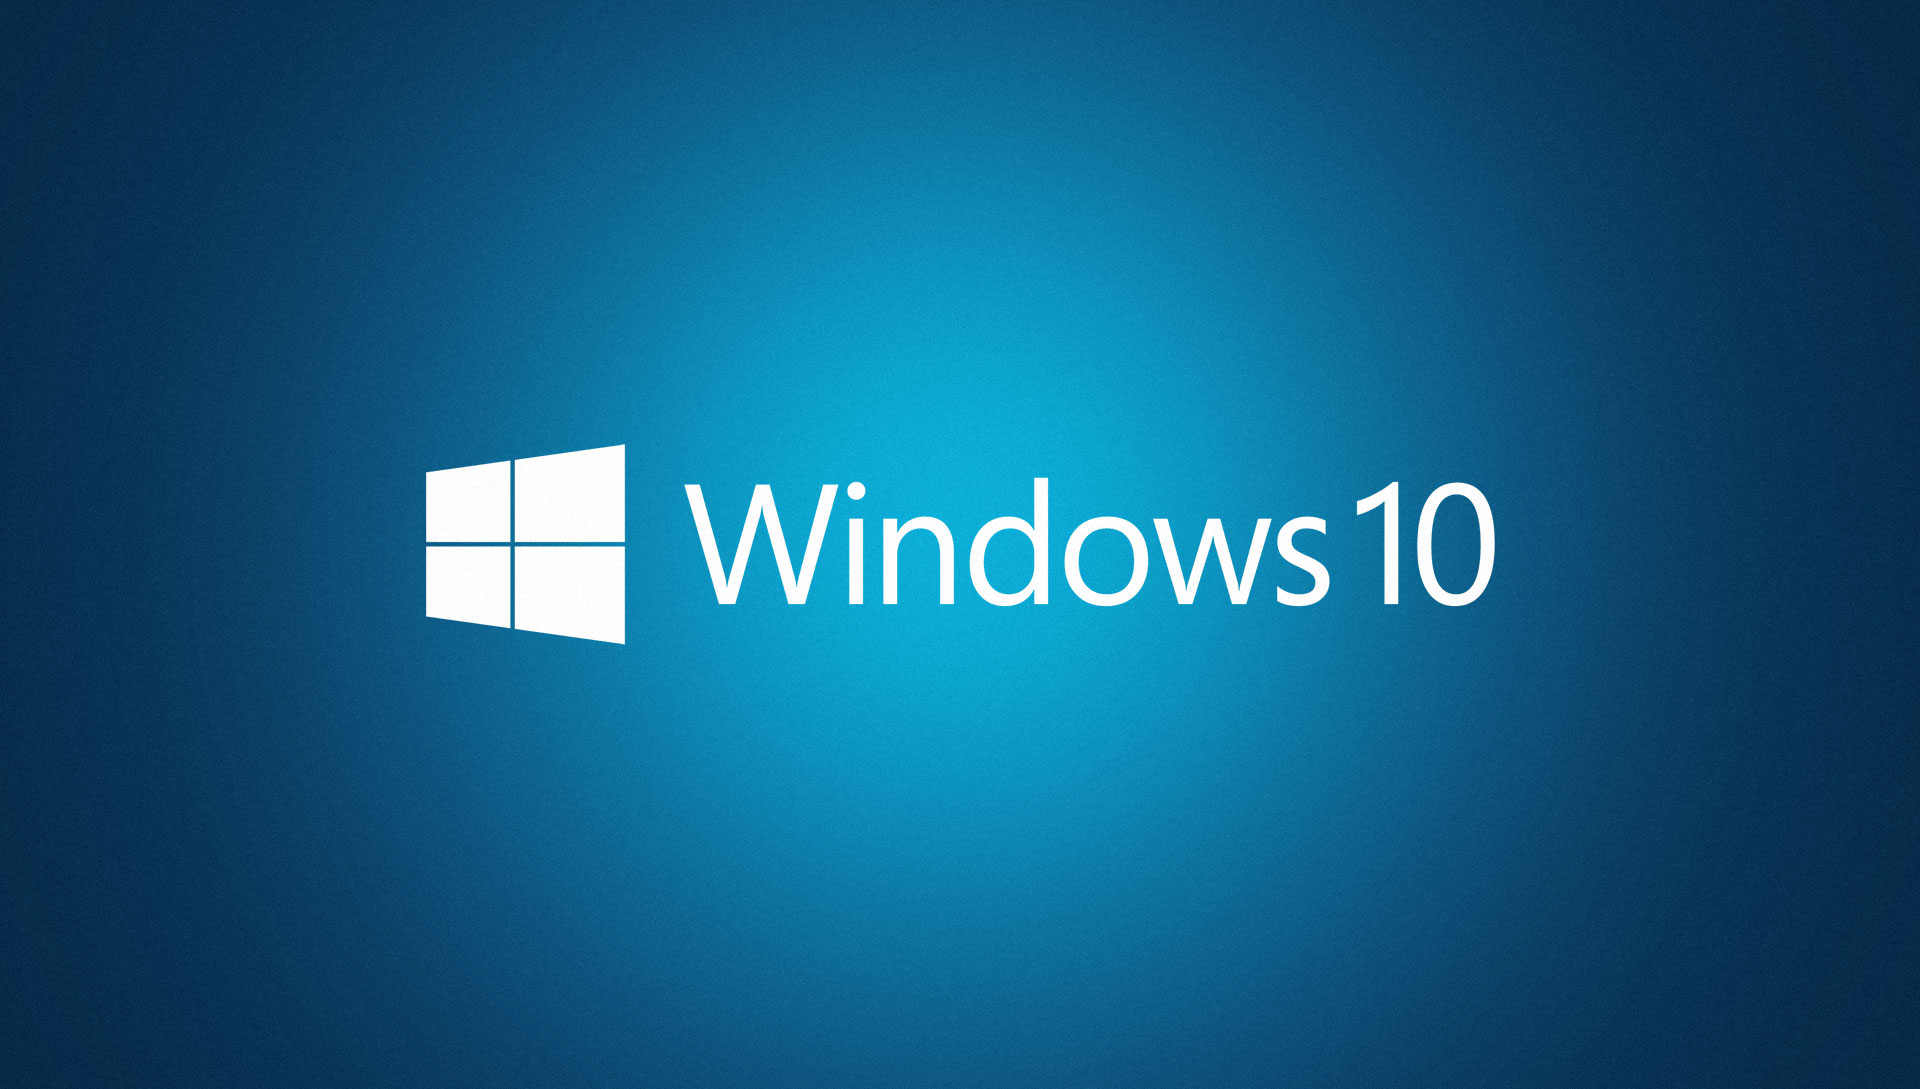 Watch the Windows 10 media briefing live webcast on Wednesday   The